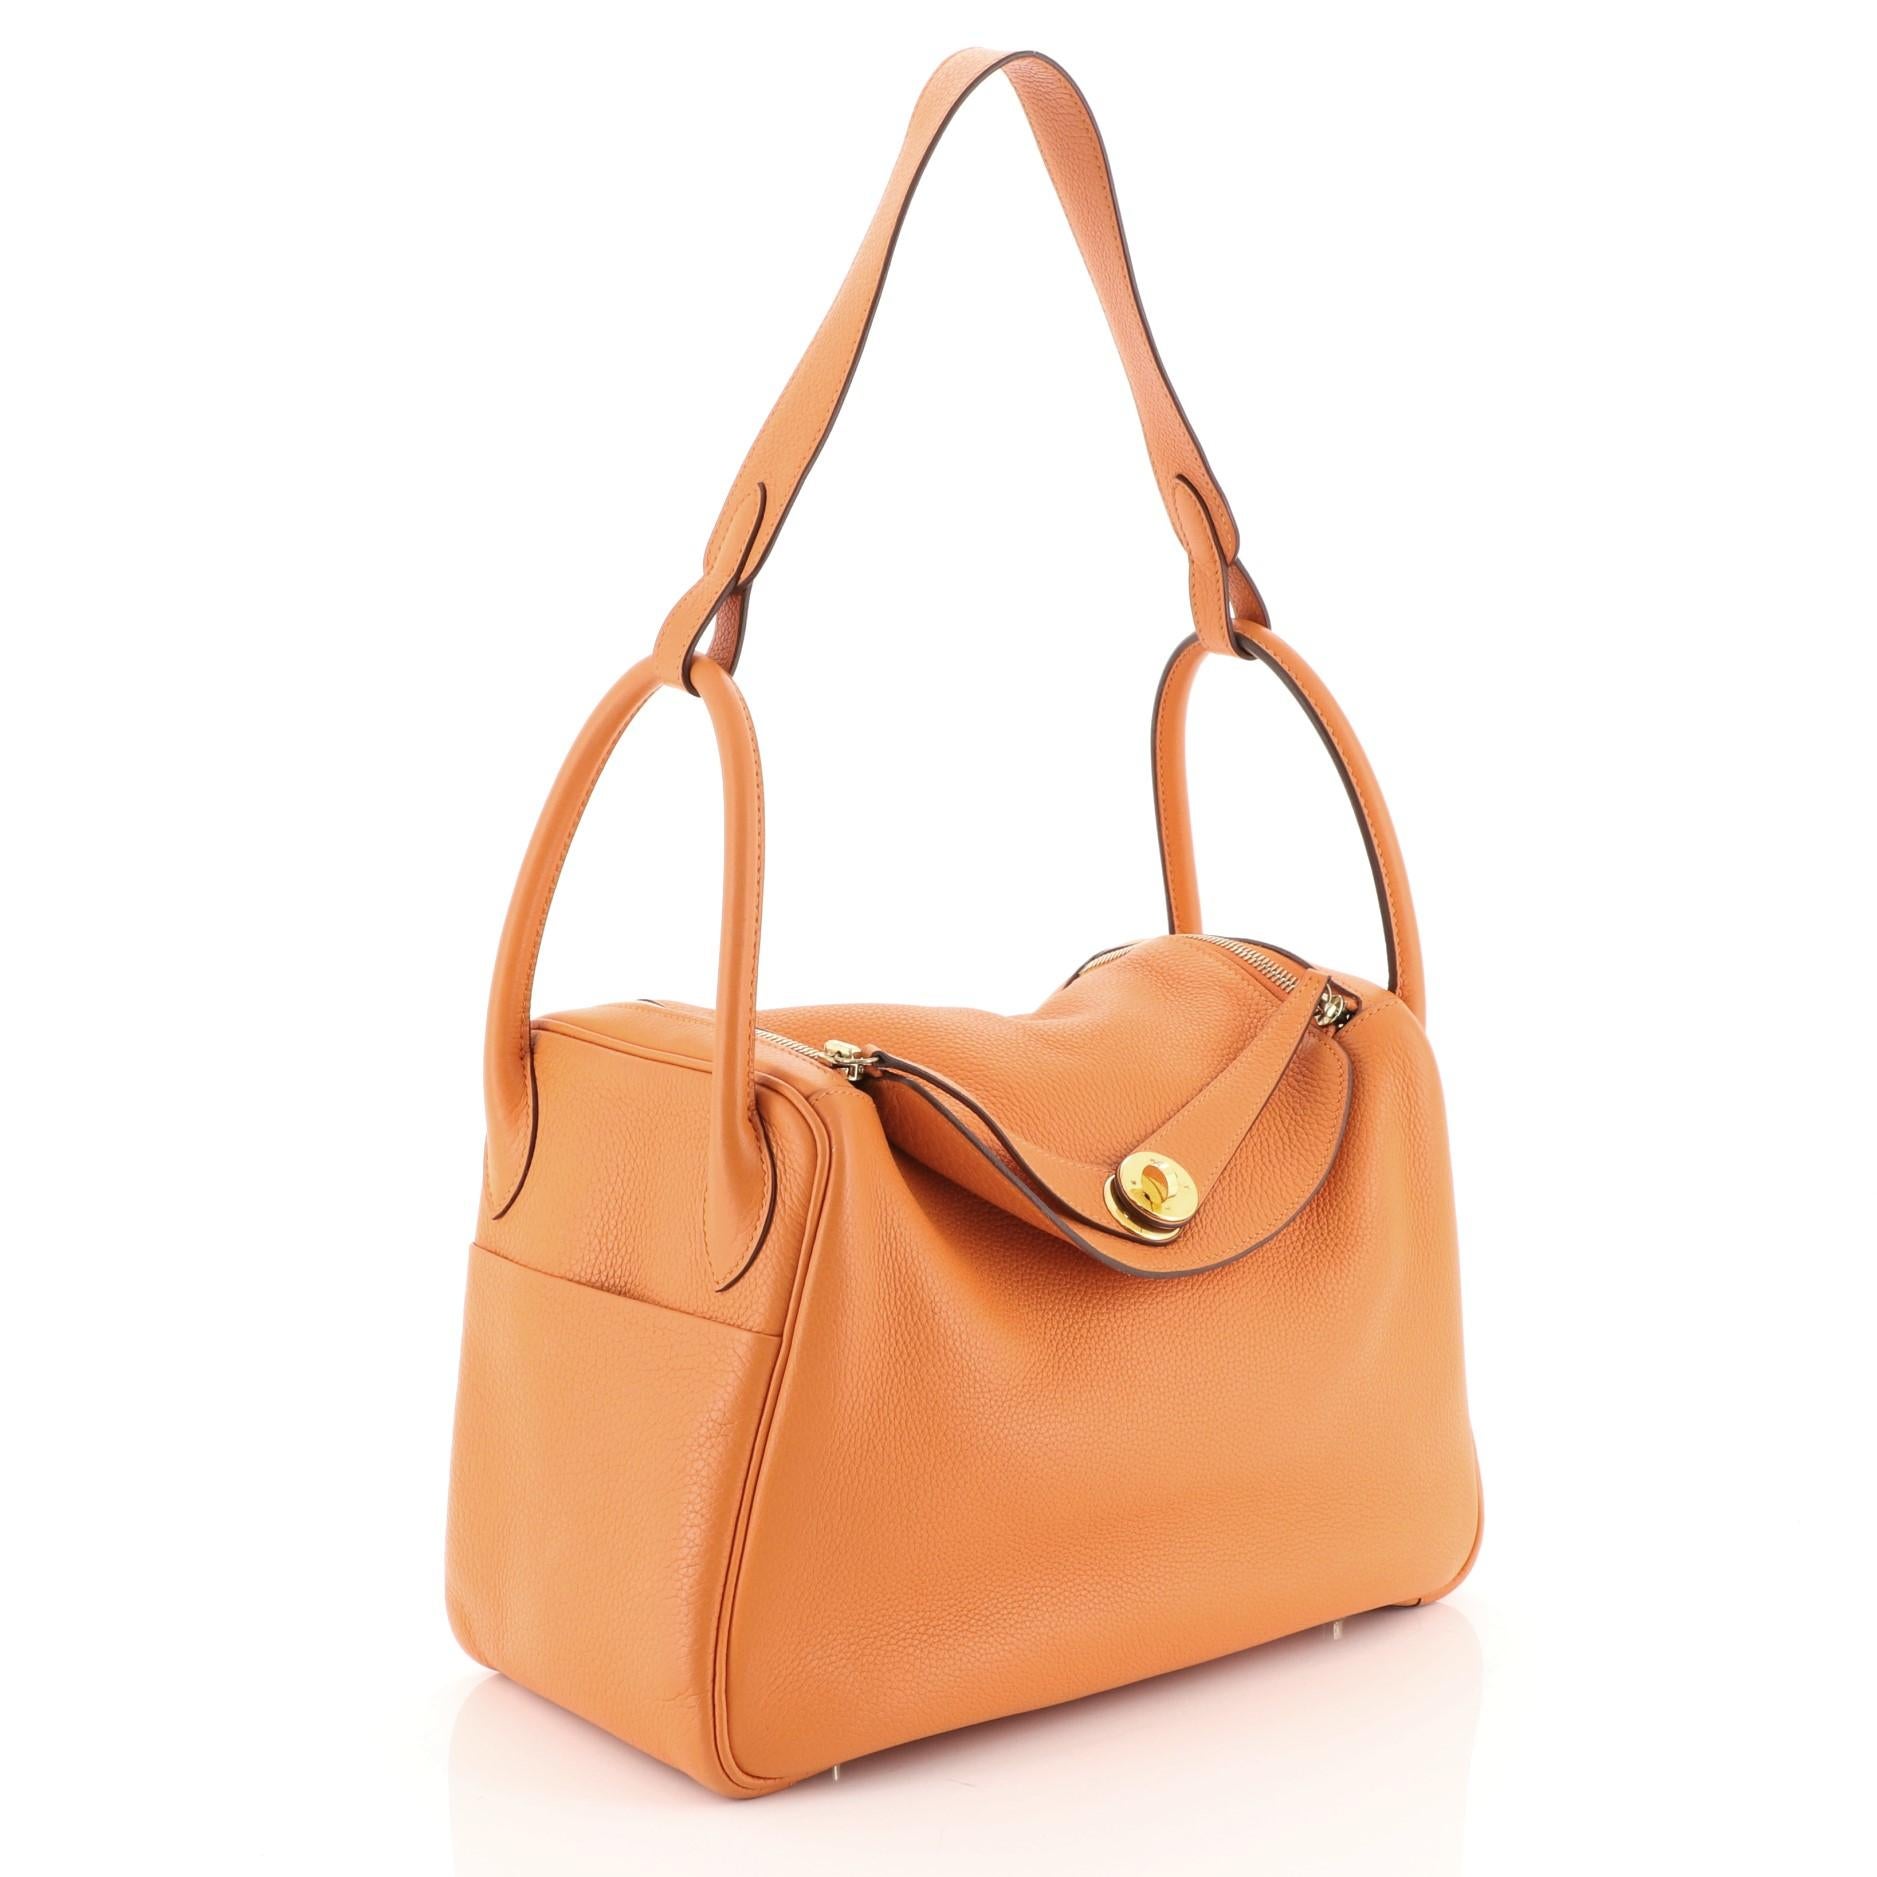 This Hermes Lindy Handbag Clemence 30, crafted in Orange H orange Clemence leather, features dual-rolled handles, two sides slip pockets, a connecting long strap and gold hardware. Its turn-lock and top-zipper closure opens to an Orange H orange